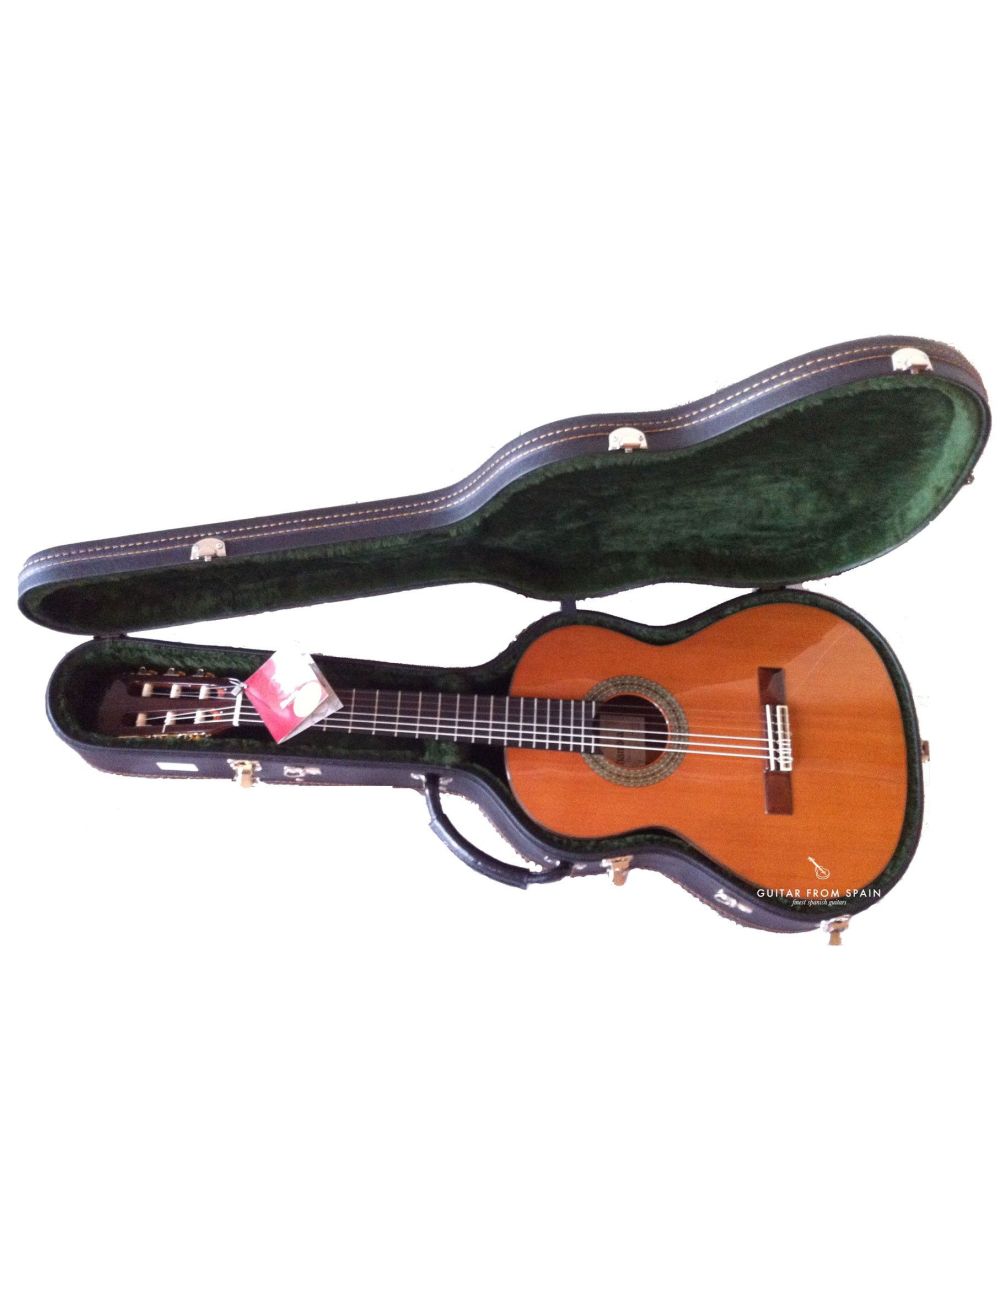 Alhambra 9569 1/2 Classical guitar case 9569 Special sizes